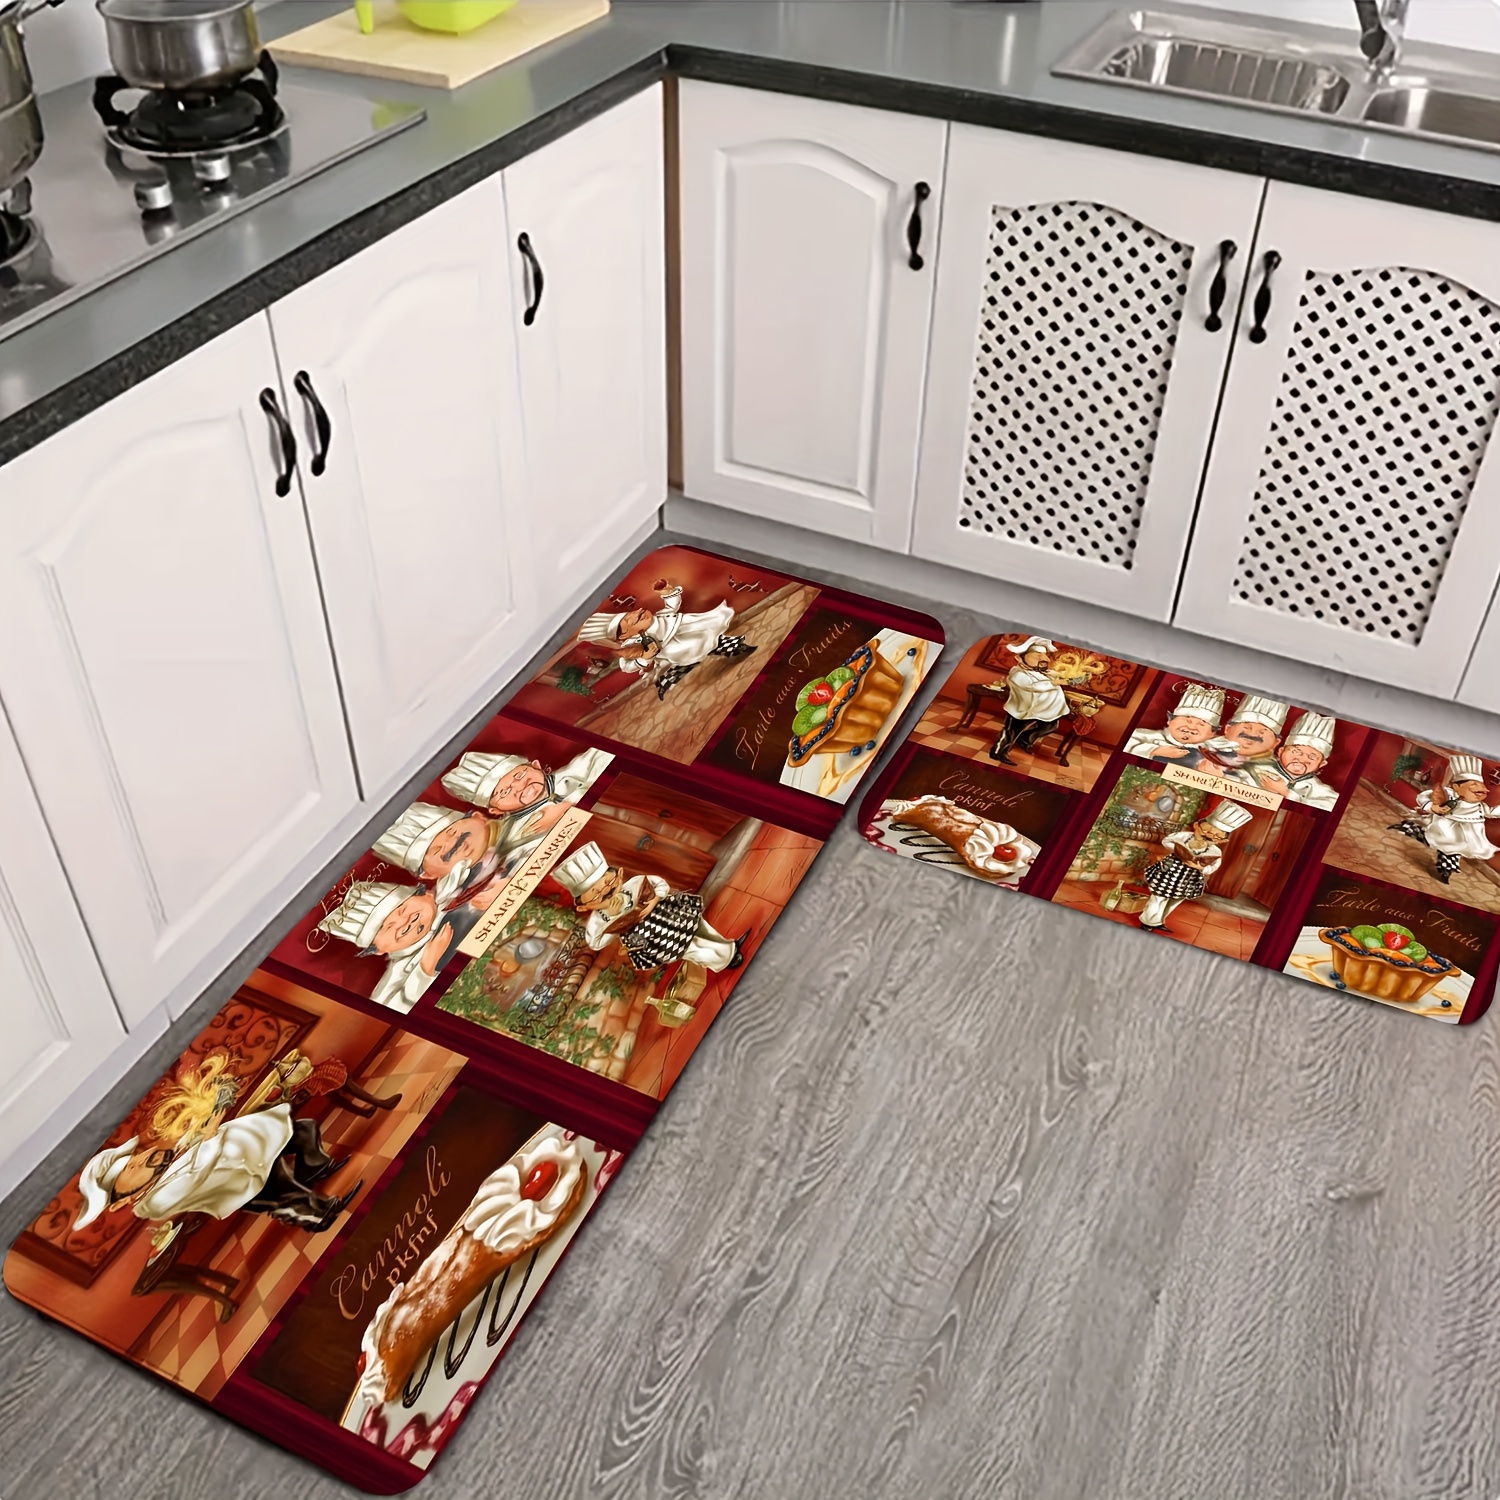 

Cartoon Chef Mat - Stain-resistant, Machine Washable Polyester Rug For Kitchen, Bathroom, Hallway - Home Decor Accent